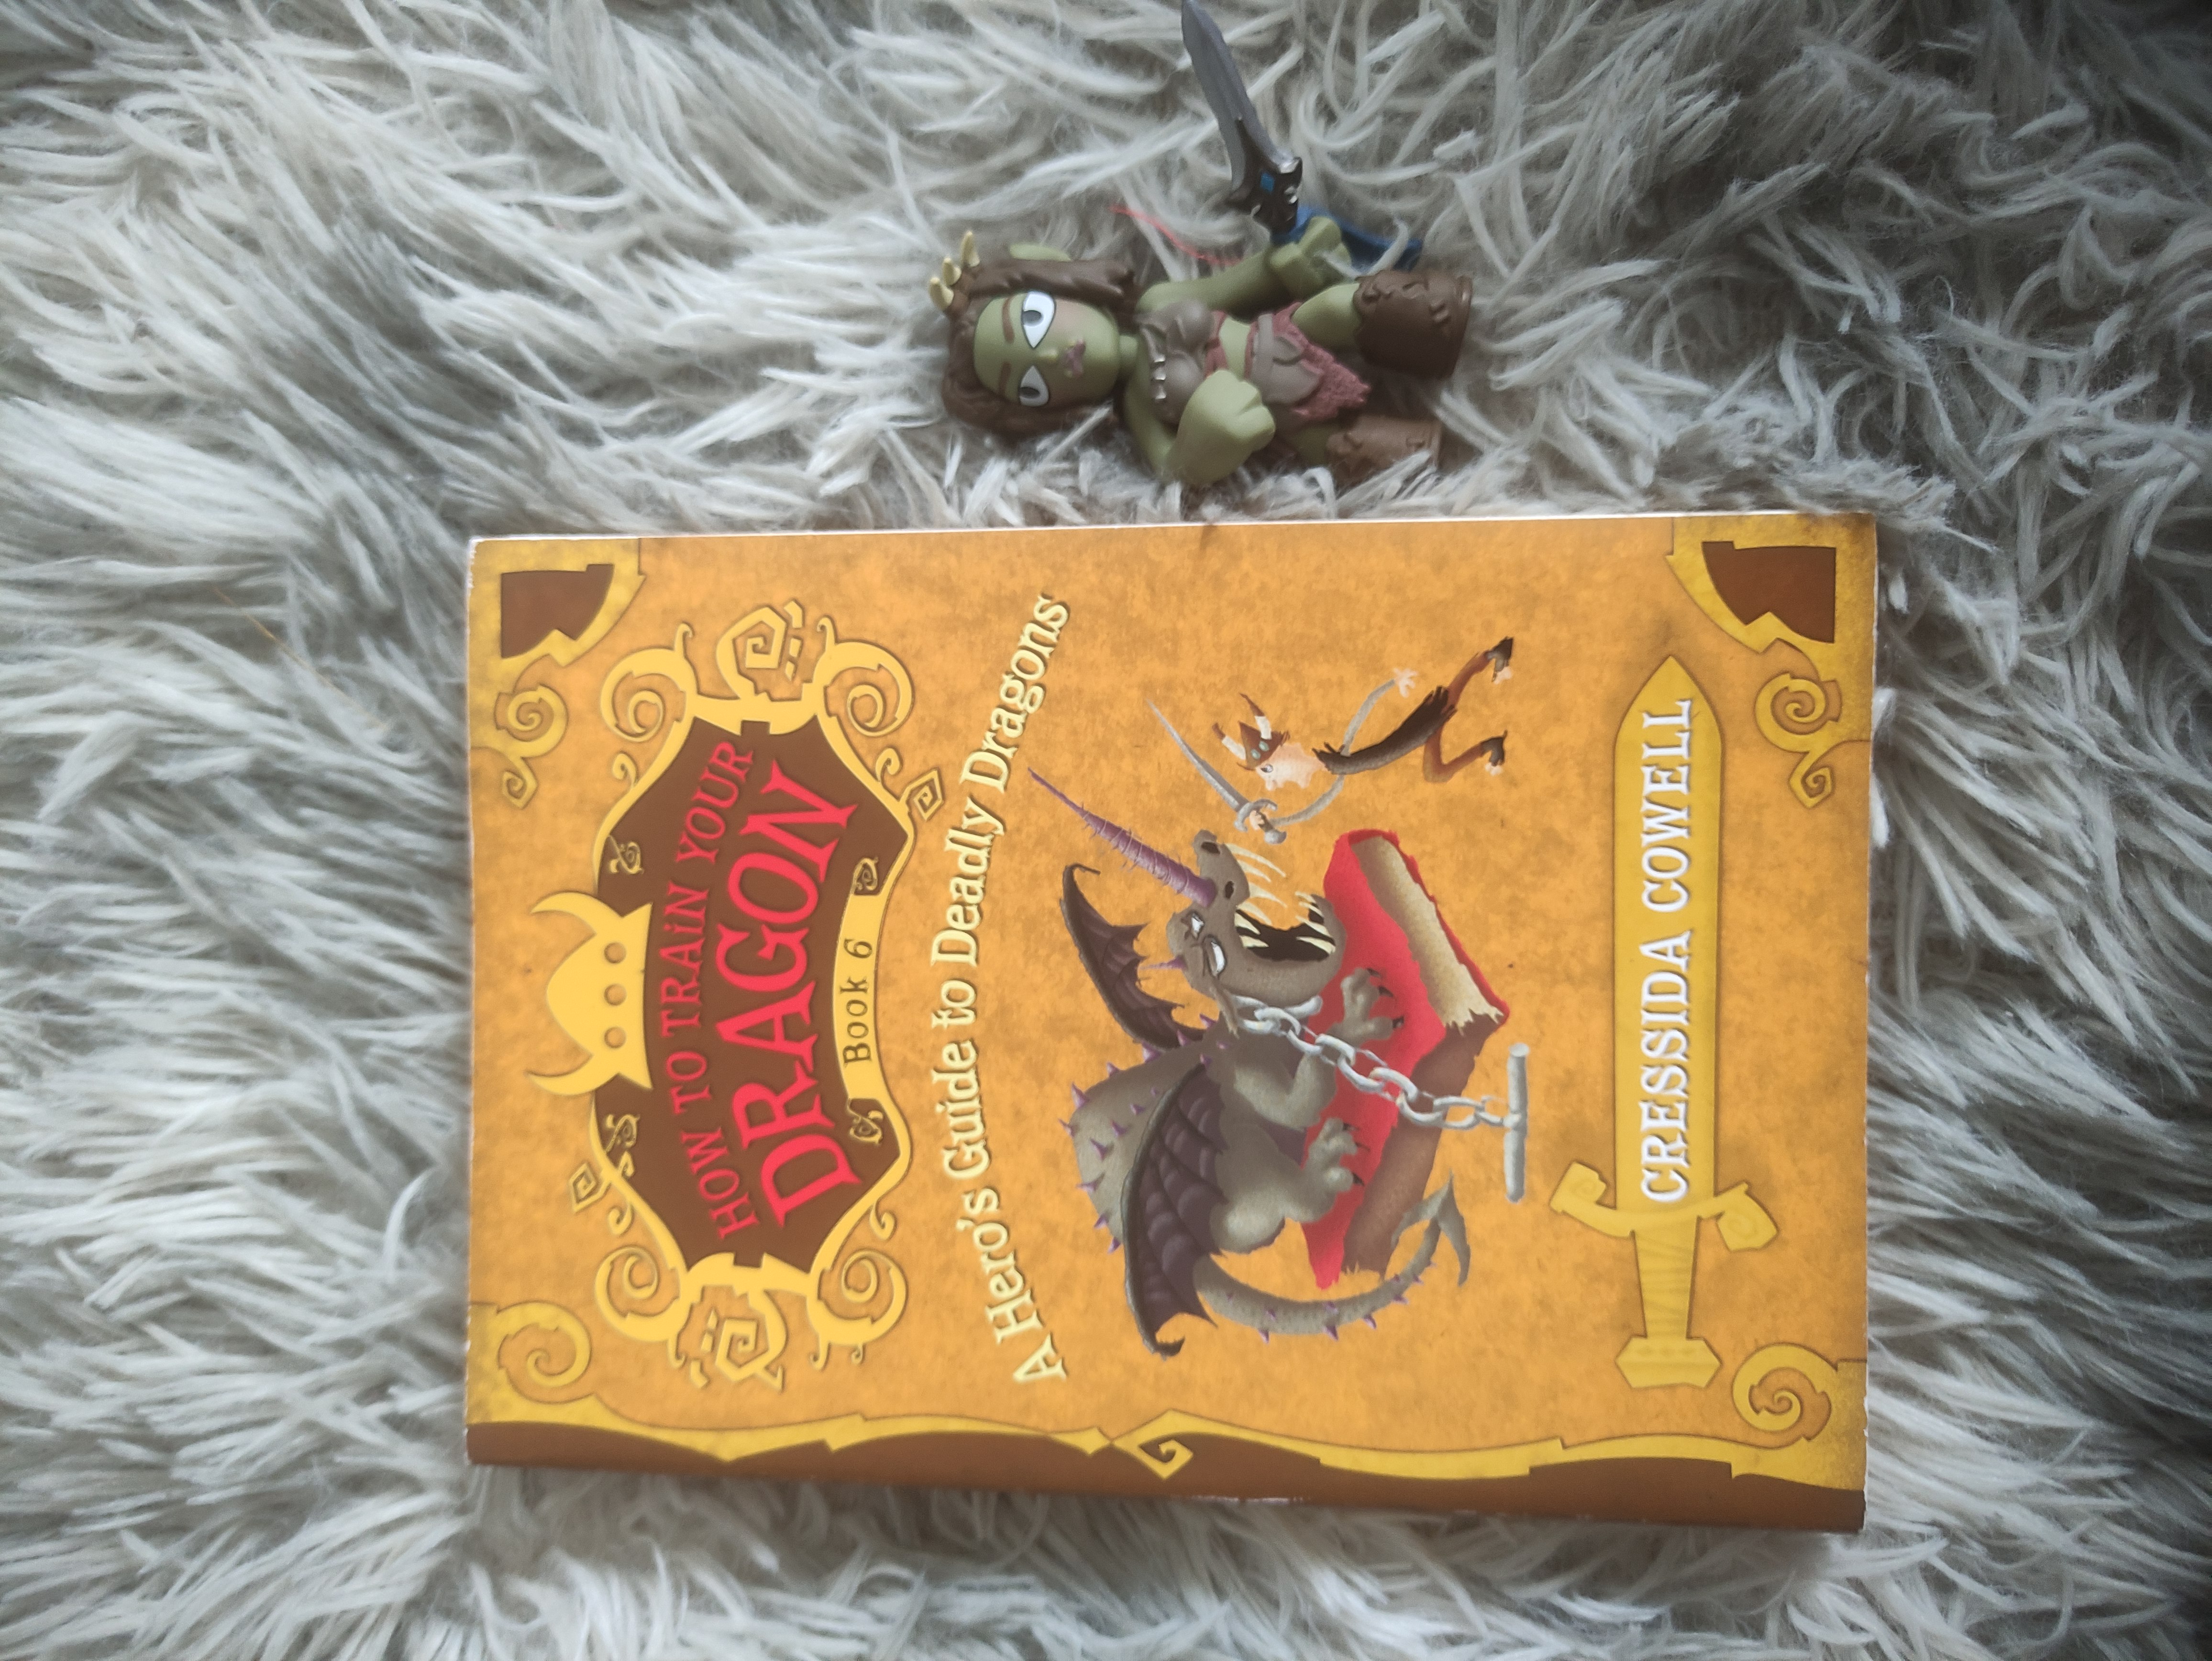 Lazada　Book　Train　Your　Hero's　to　Dragon　Dragons)　(A　PH　Guide　Deadly　How　to